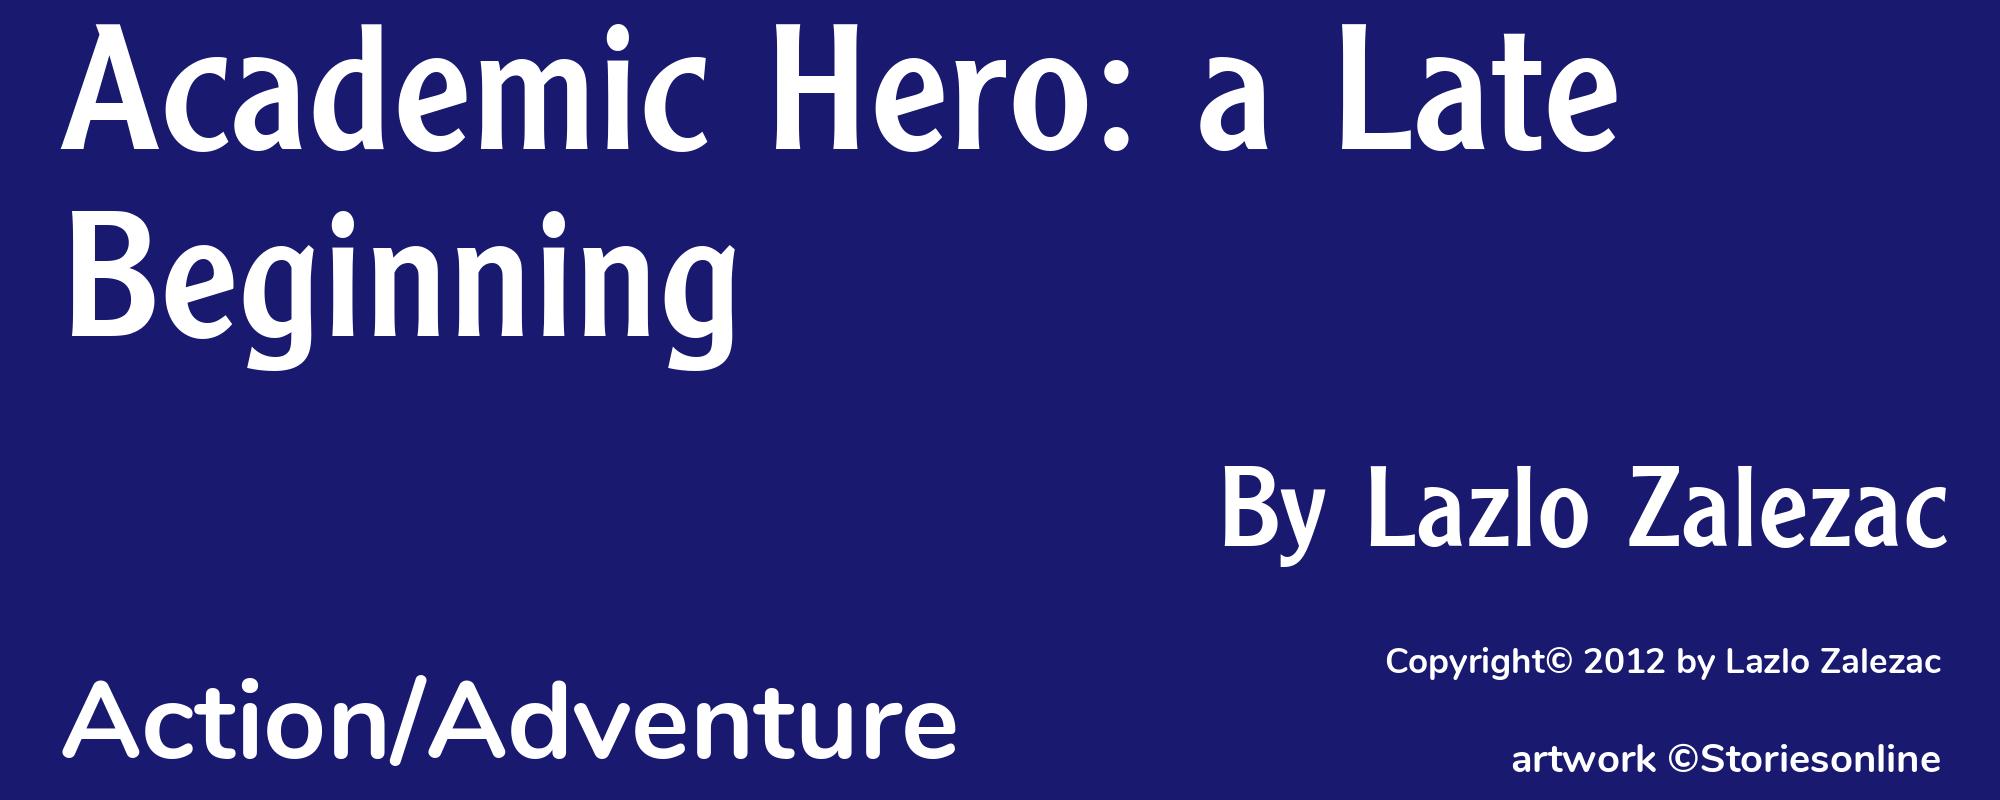 Academic Hero: a Late Beginning - Cover